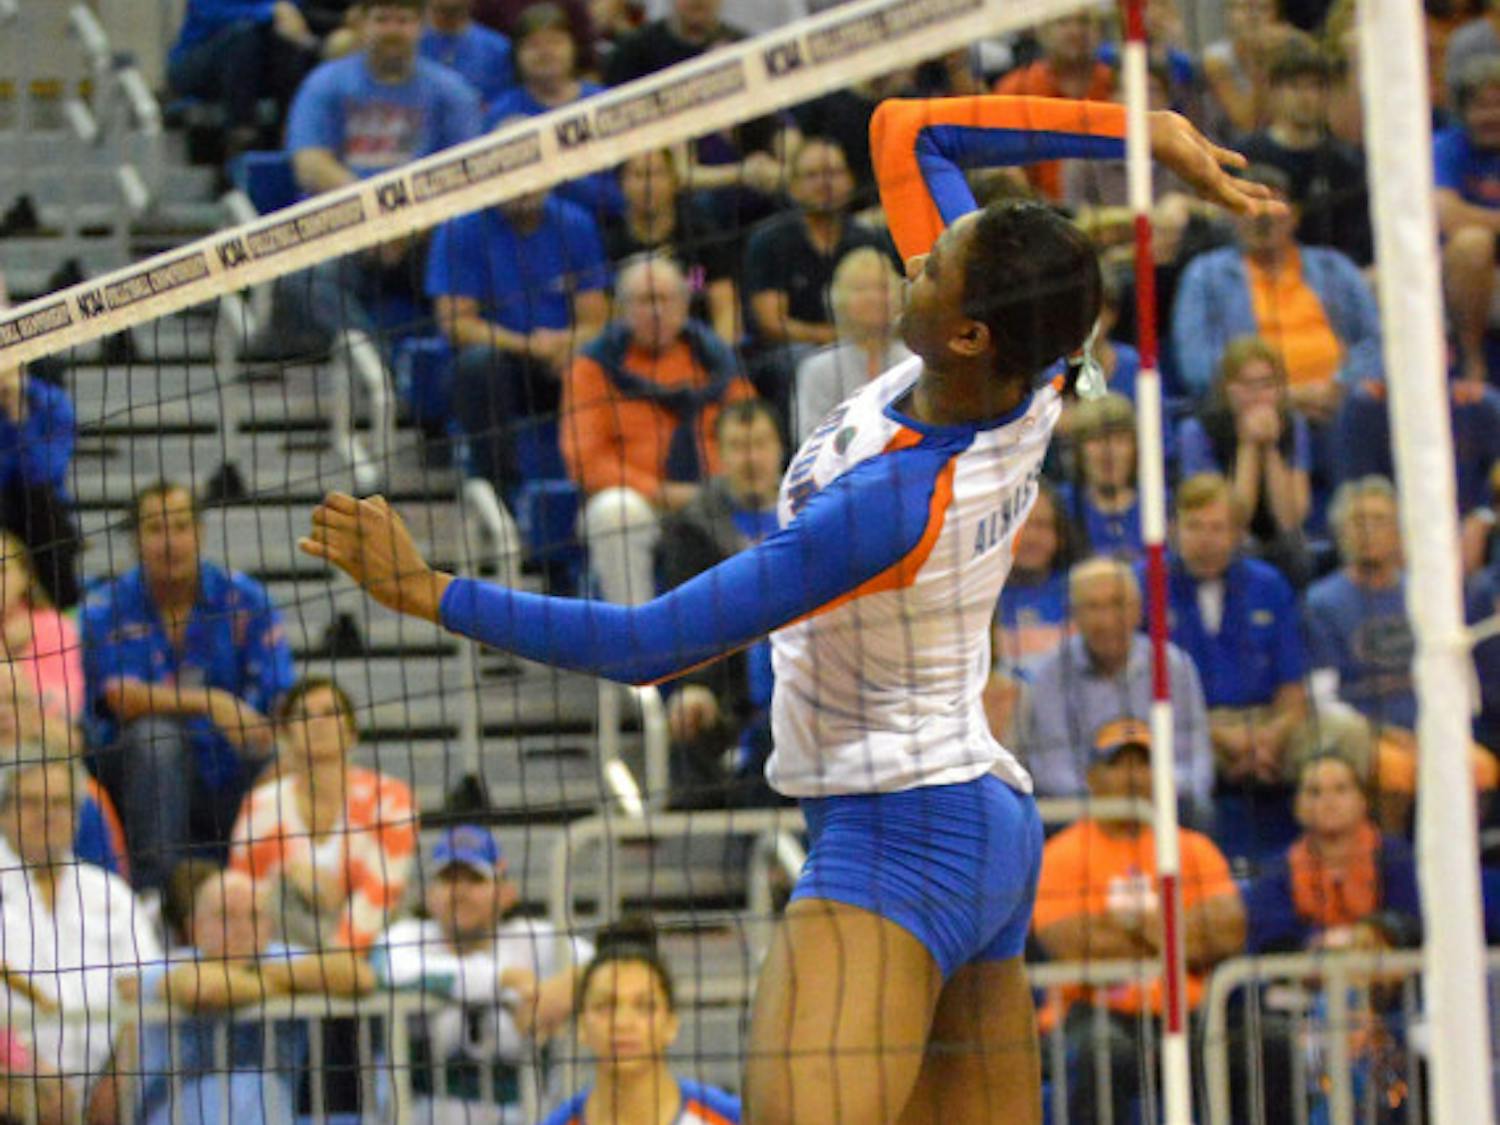 Rhamat Alhassan swings for a kill attempt during Florida's 3-0 win against Alabama State in the first round of the NCAA Tournament on Dec. 5 in the O'Connell Center.